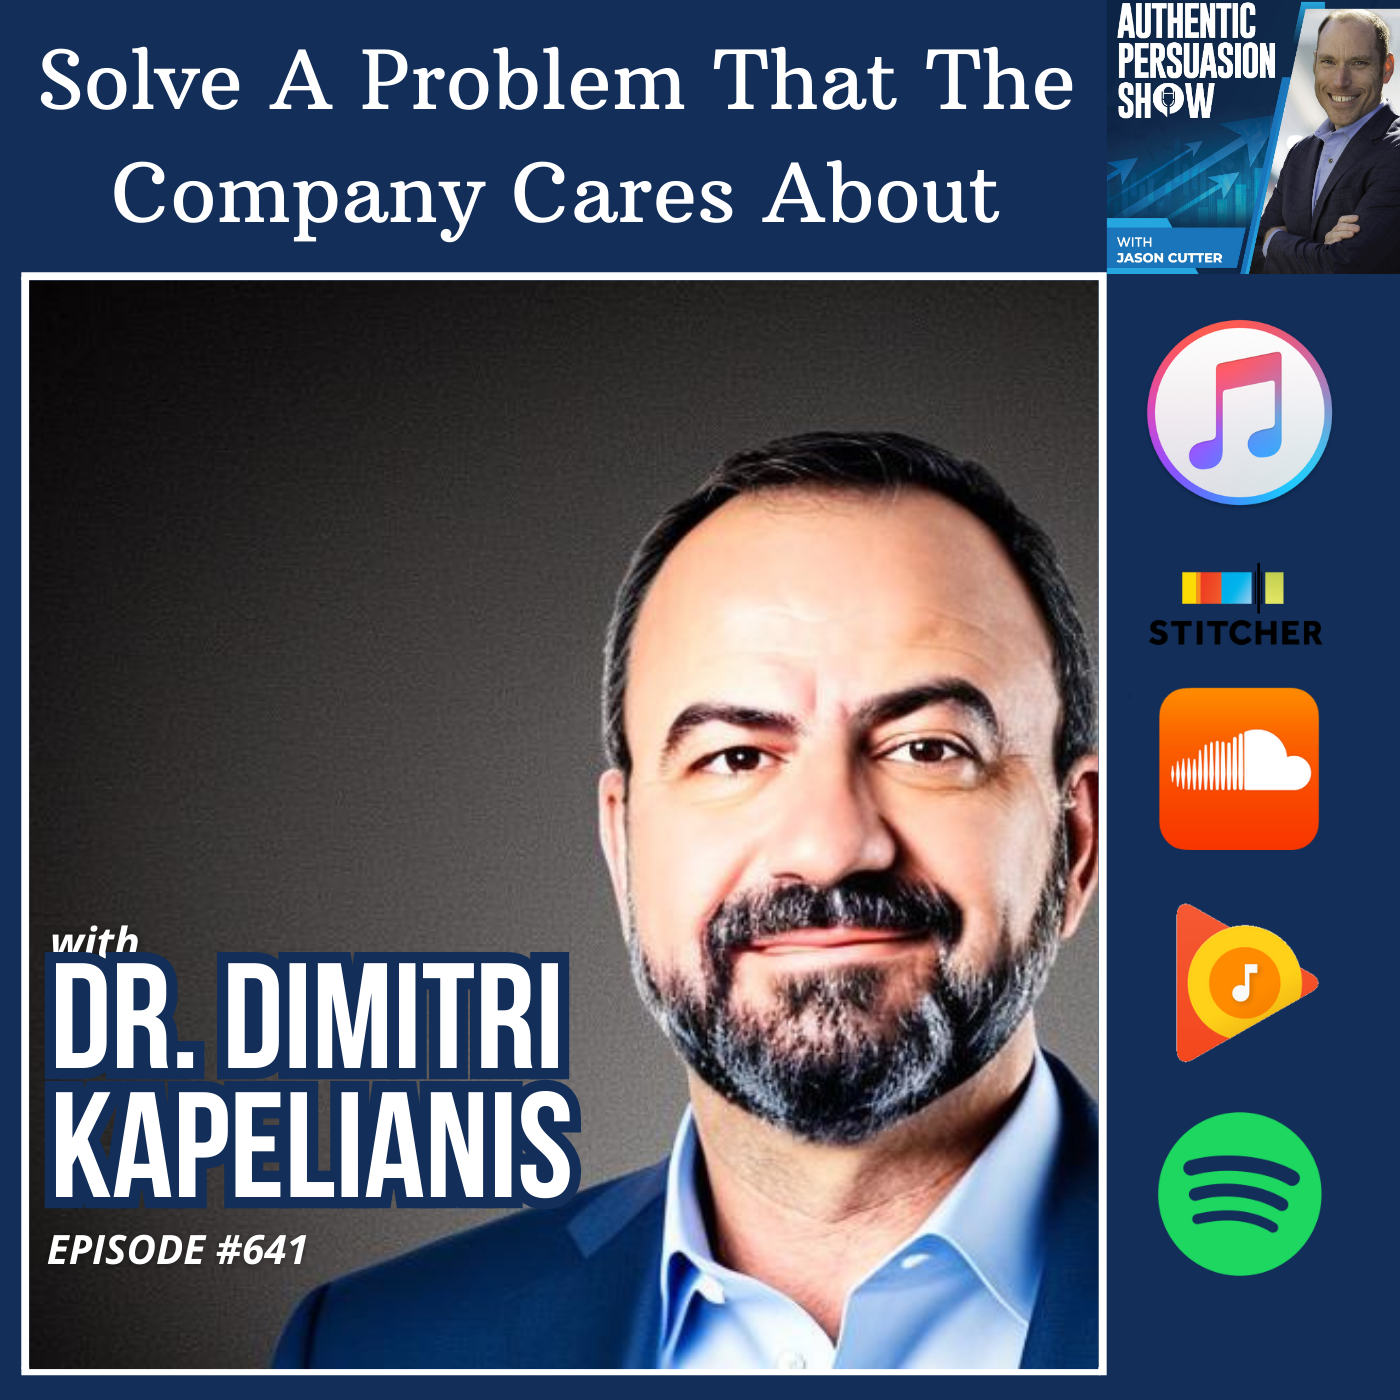 [641] Solve A Problem That The Company Cares About, with Dr. Dimitri Kapelianis from University of New Mexico